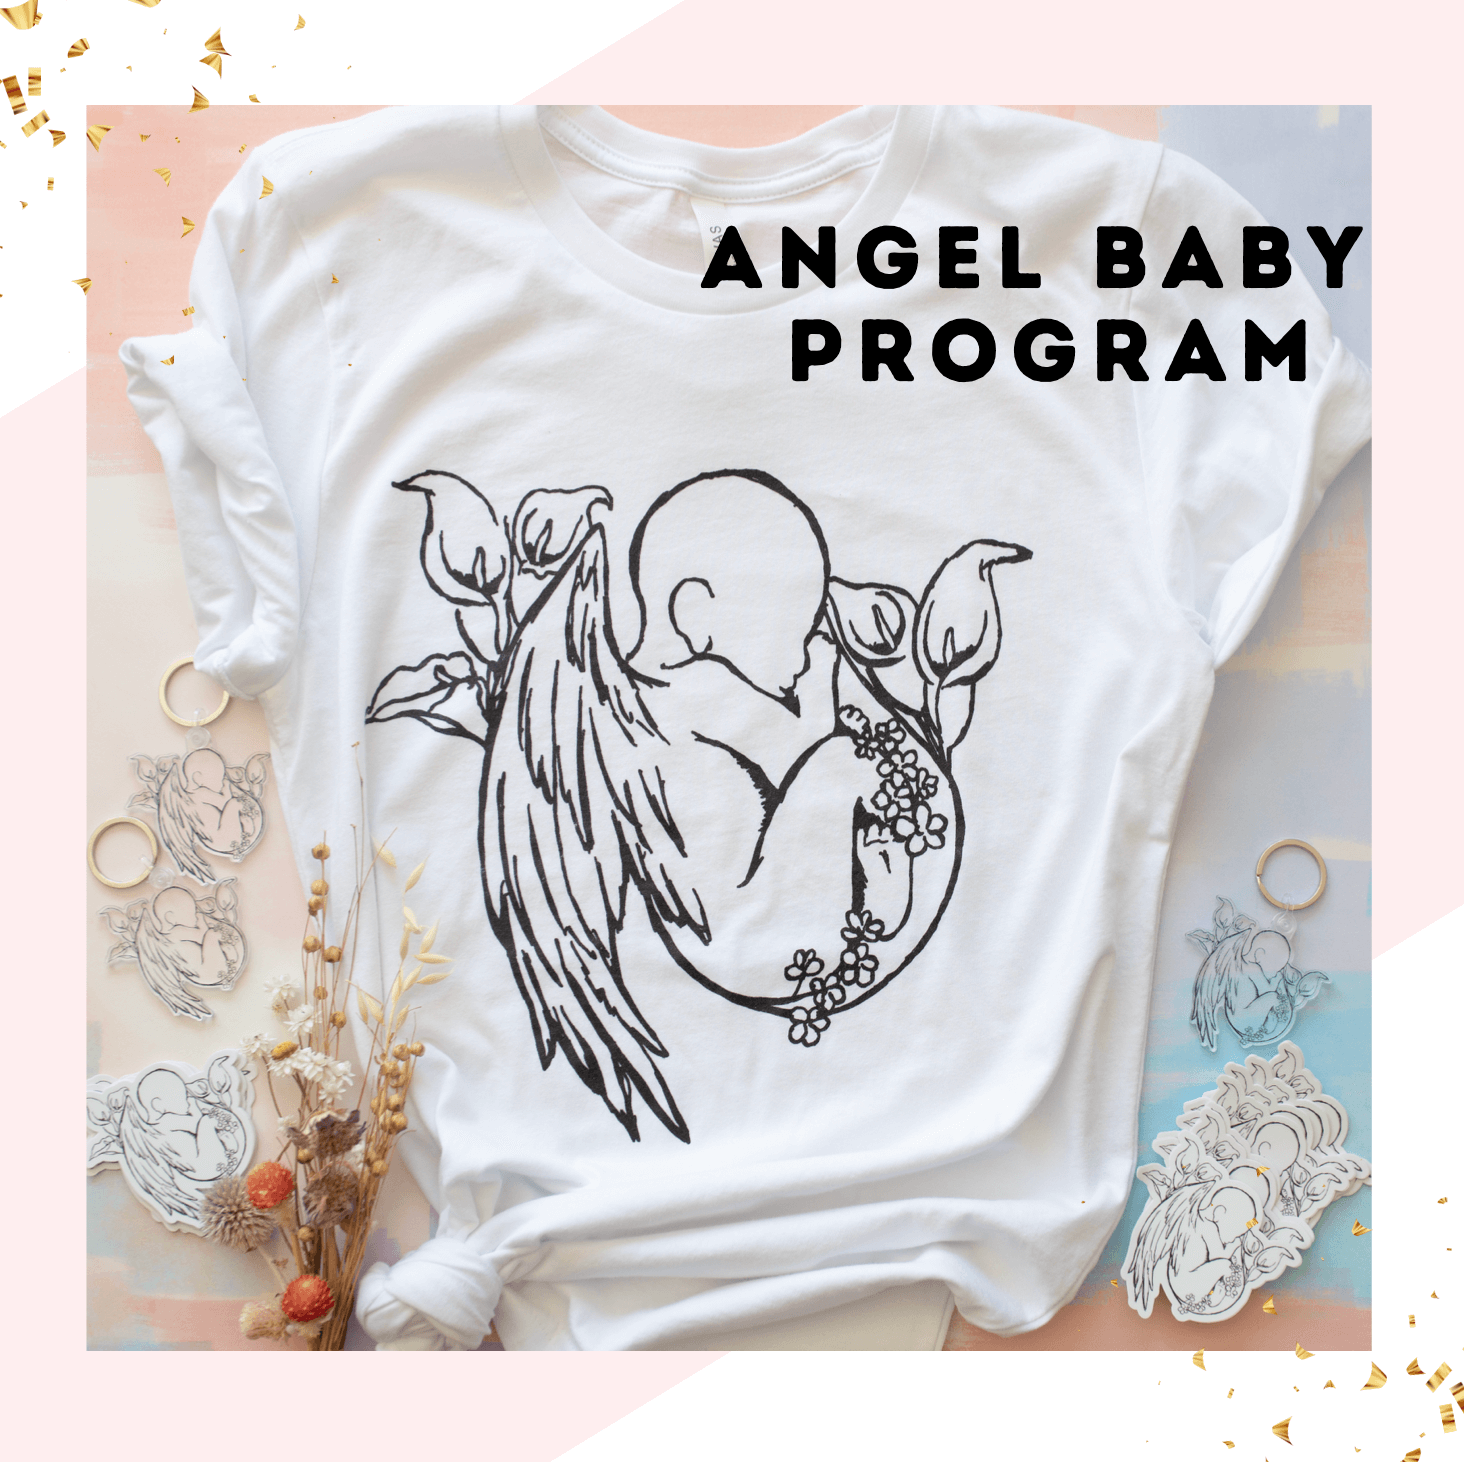 Introducing our Angel Baby Program Giving Back Breastmilk Jewelry